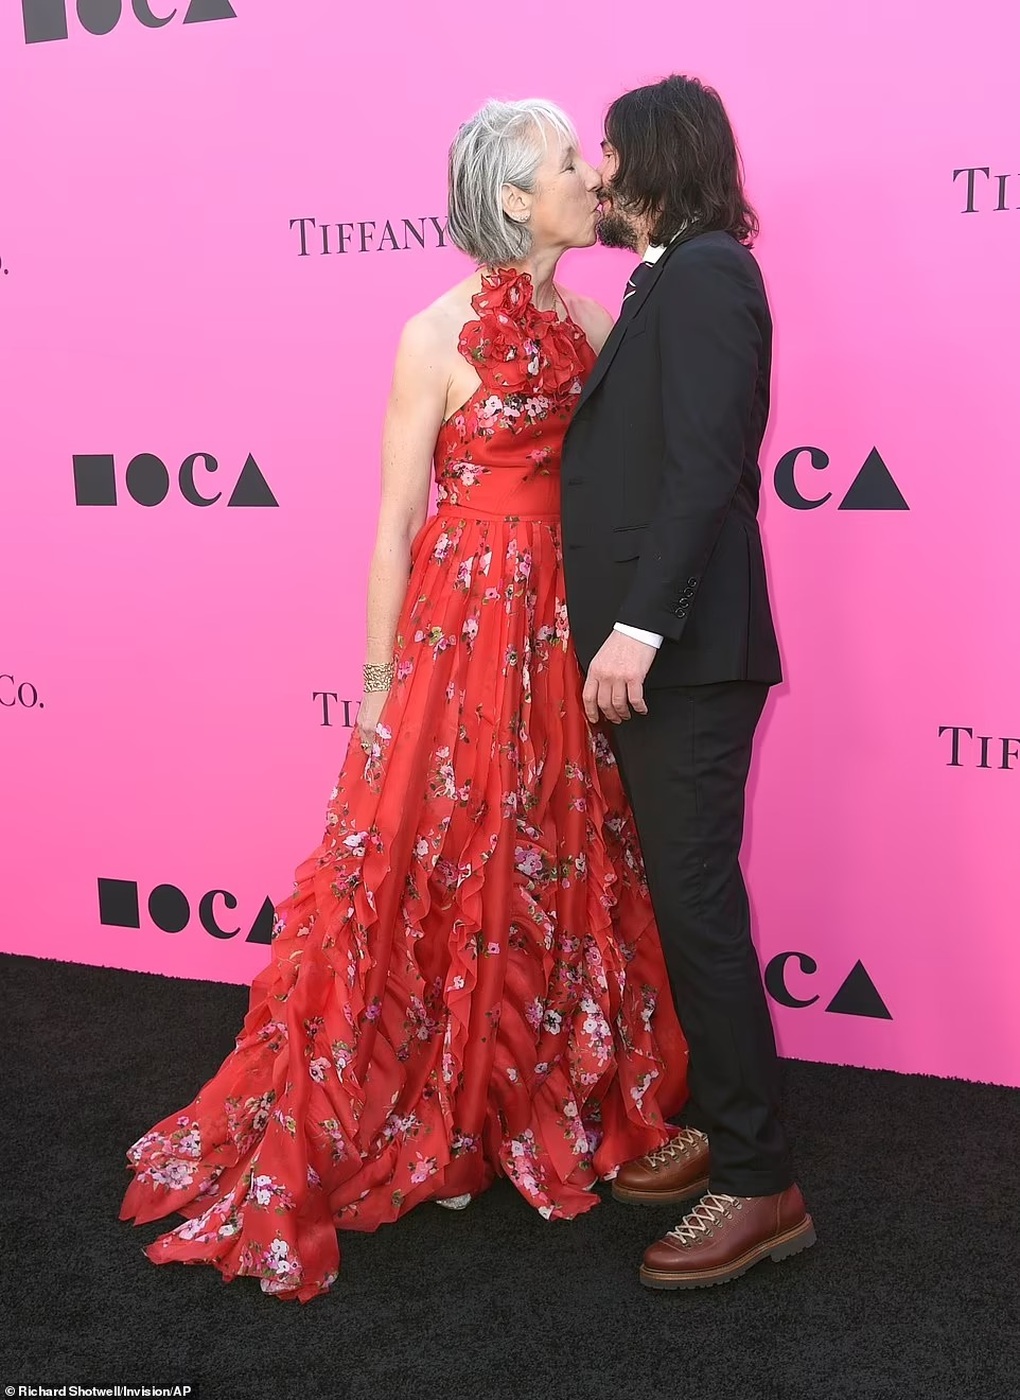 Keanu Reeves kisses his girlfriend on the red carpet, calmly talks in the bedroom - 1